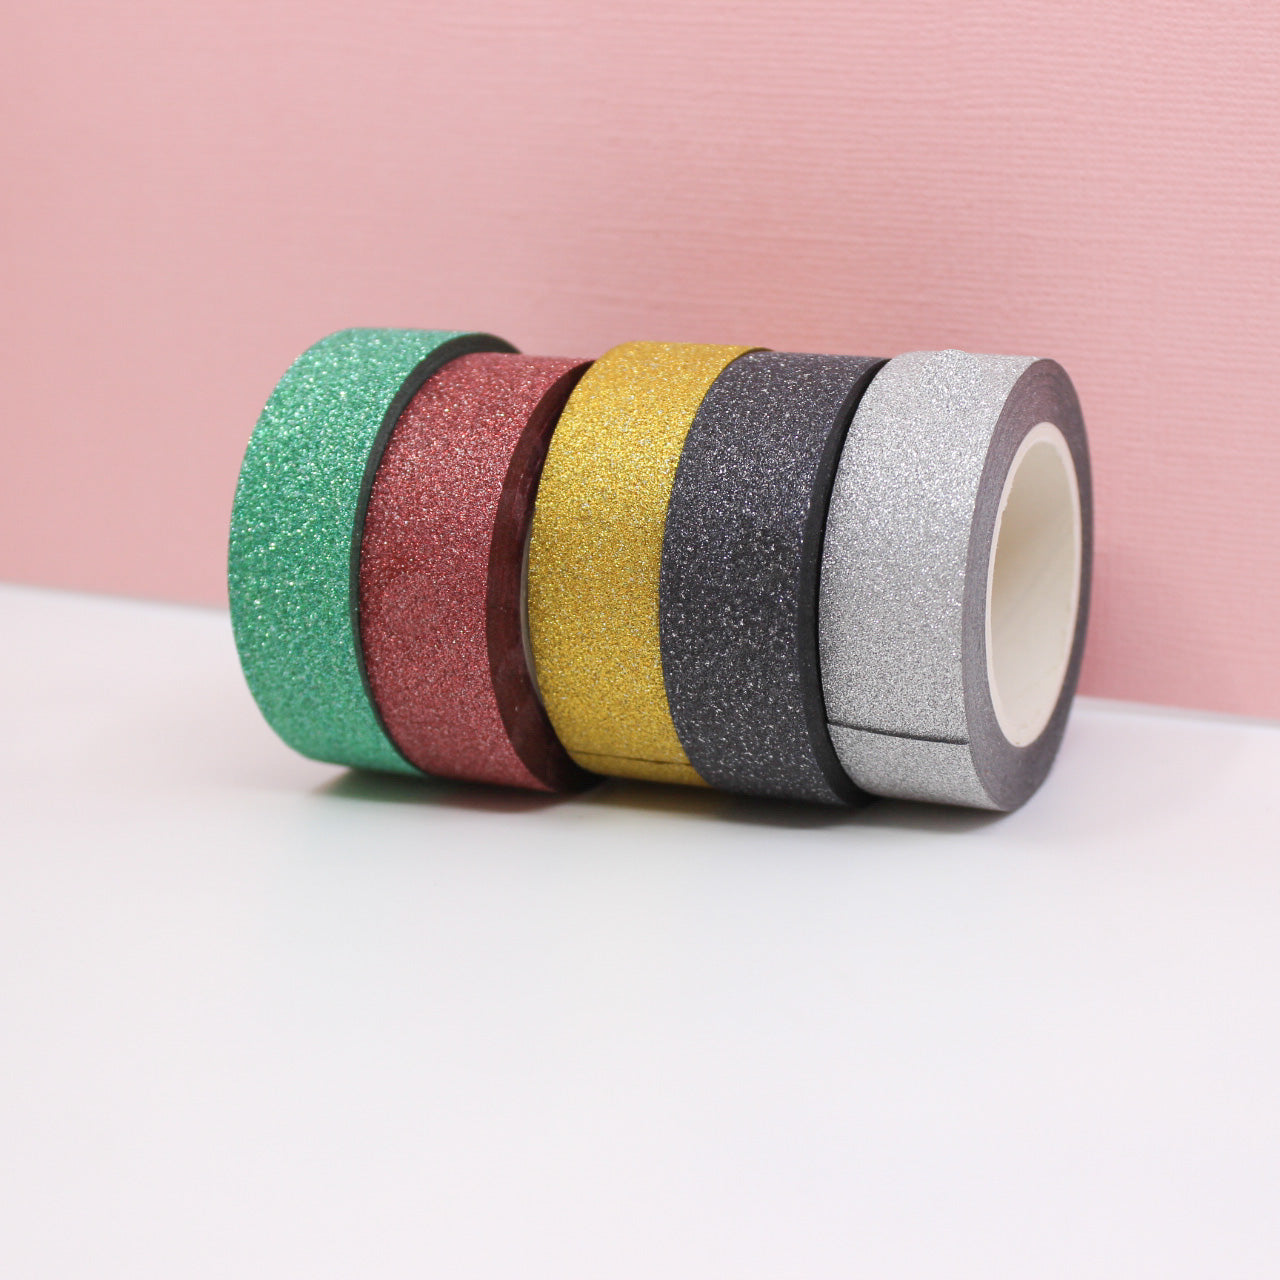 Add sparkle and shine to your winter crafts with these glitter tapes. Perfect for adding a festive touch to cards, scrapbooks, or gift wrapping. These glitter tapes are sold in green, black, silver, Gold, and Dark Red. You can buy them at BBB Supplies Craft Shop.